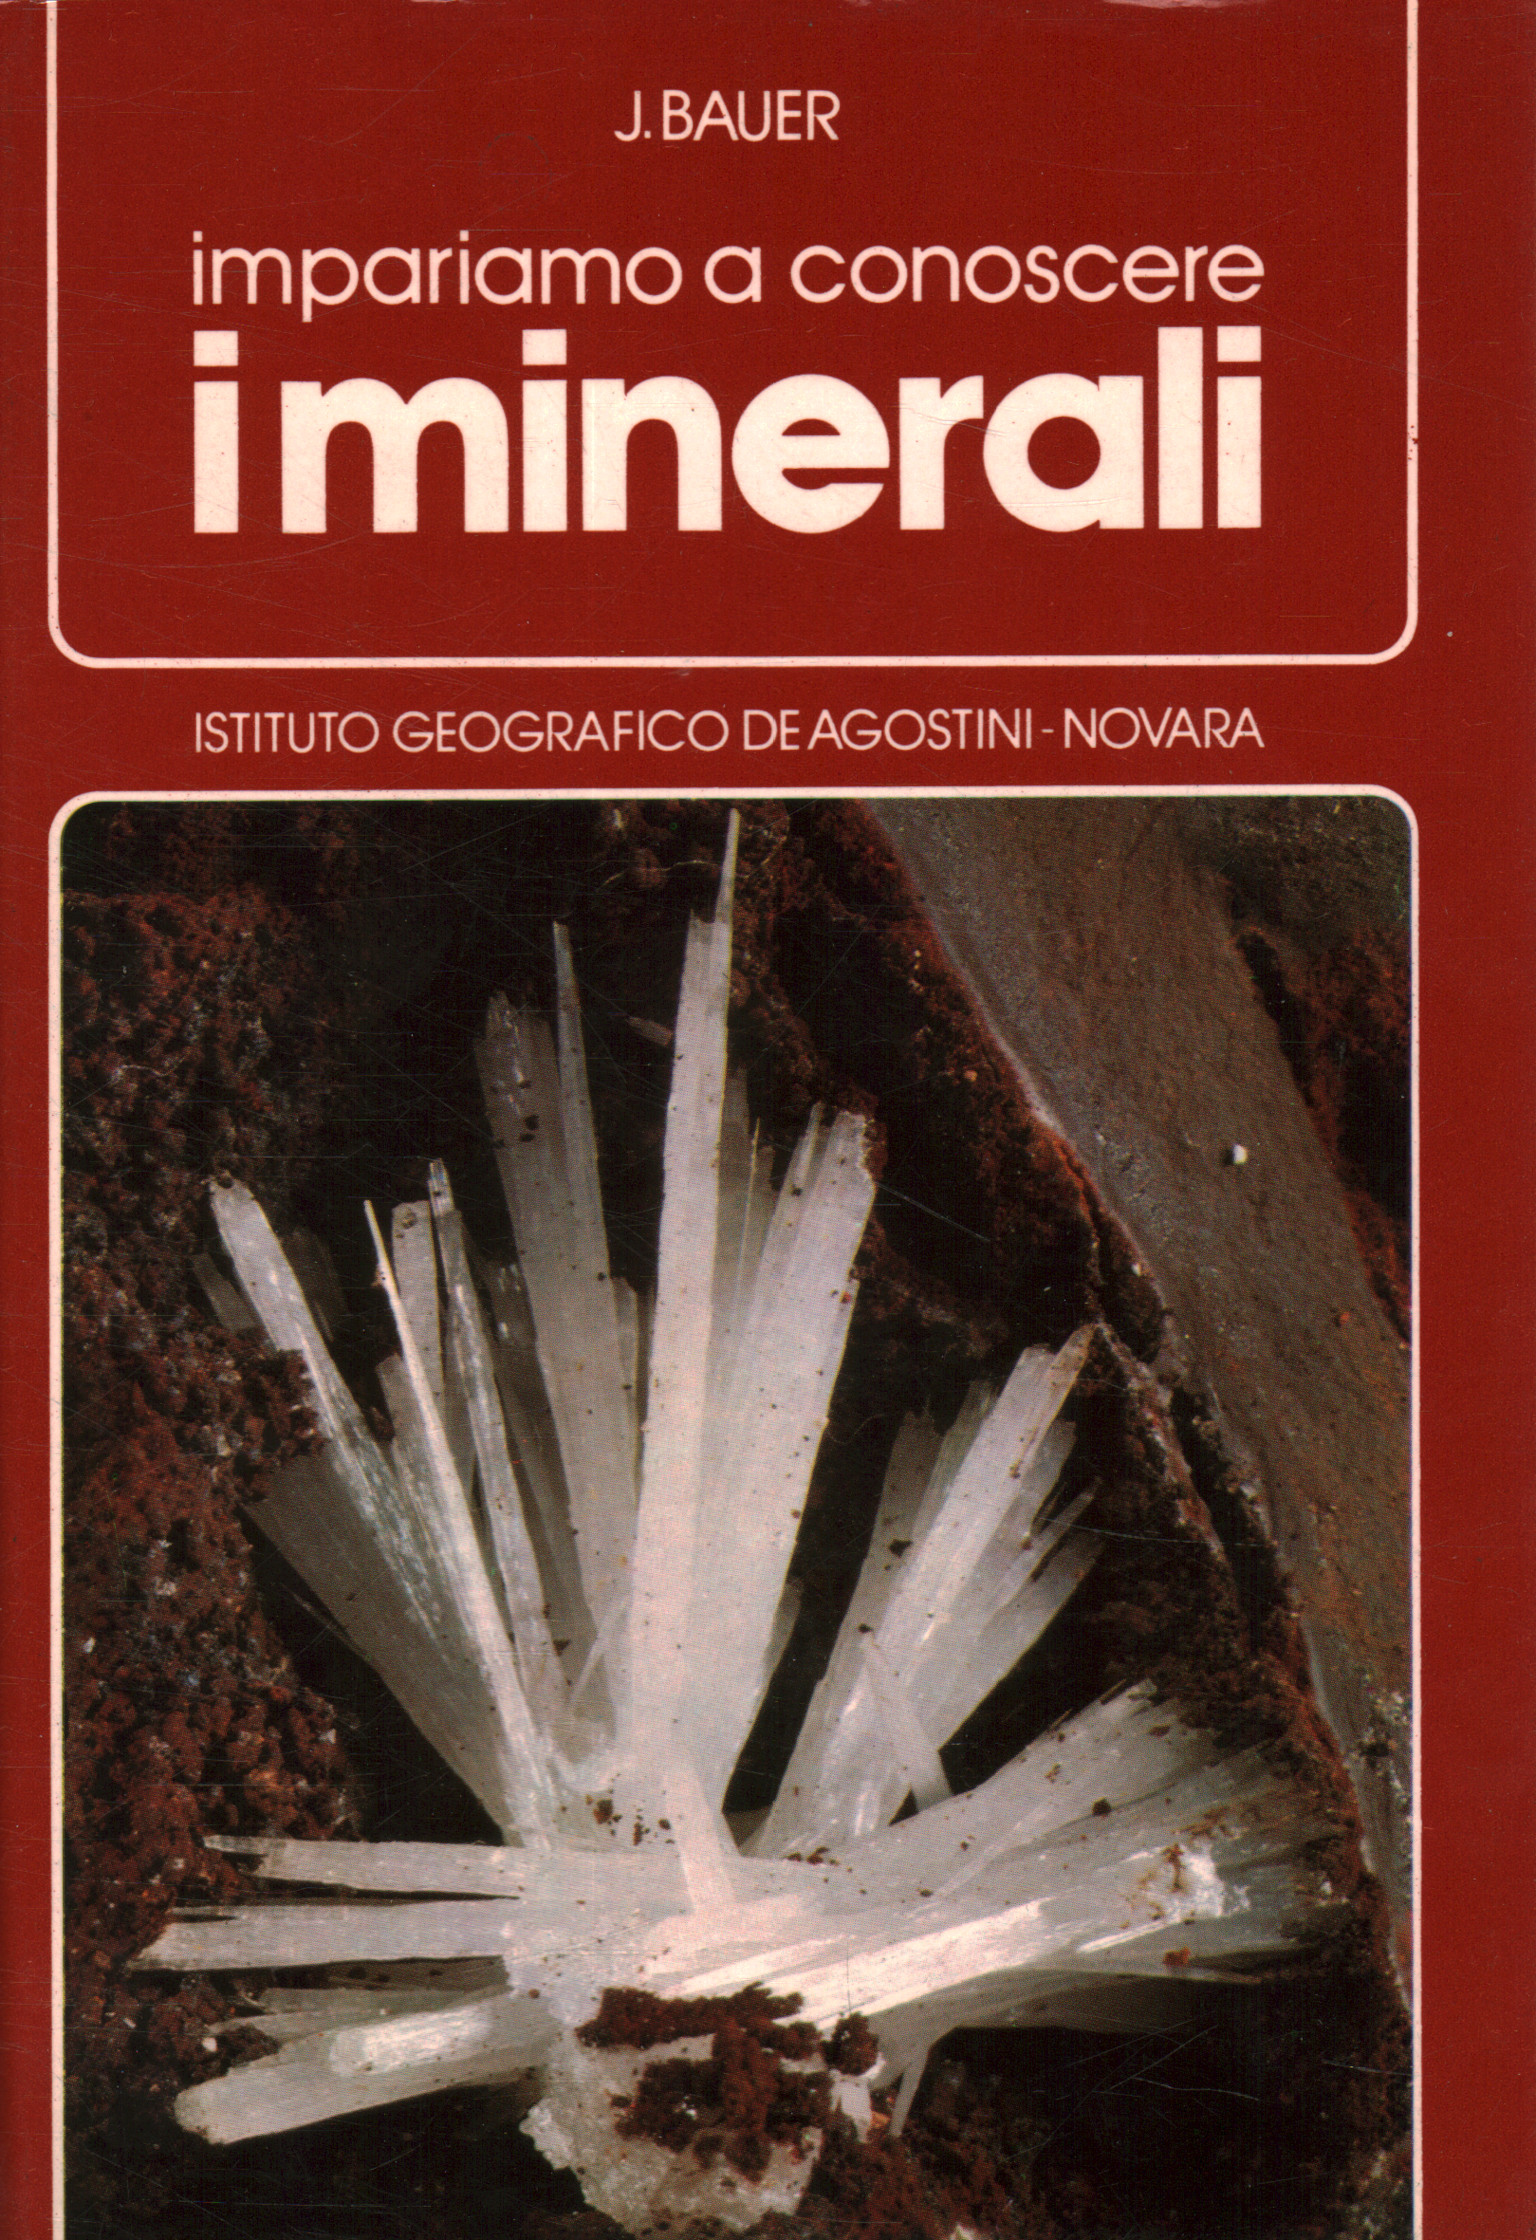 Let's learn about minerals